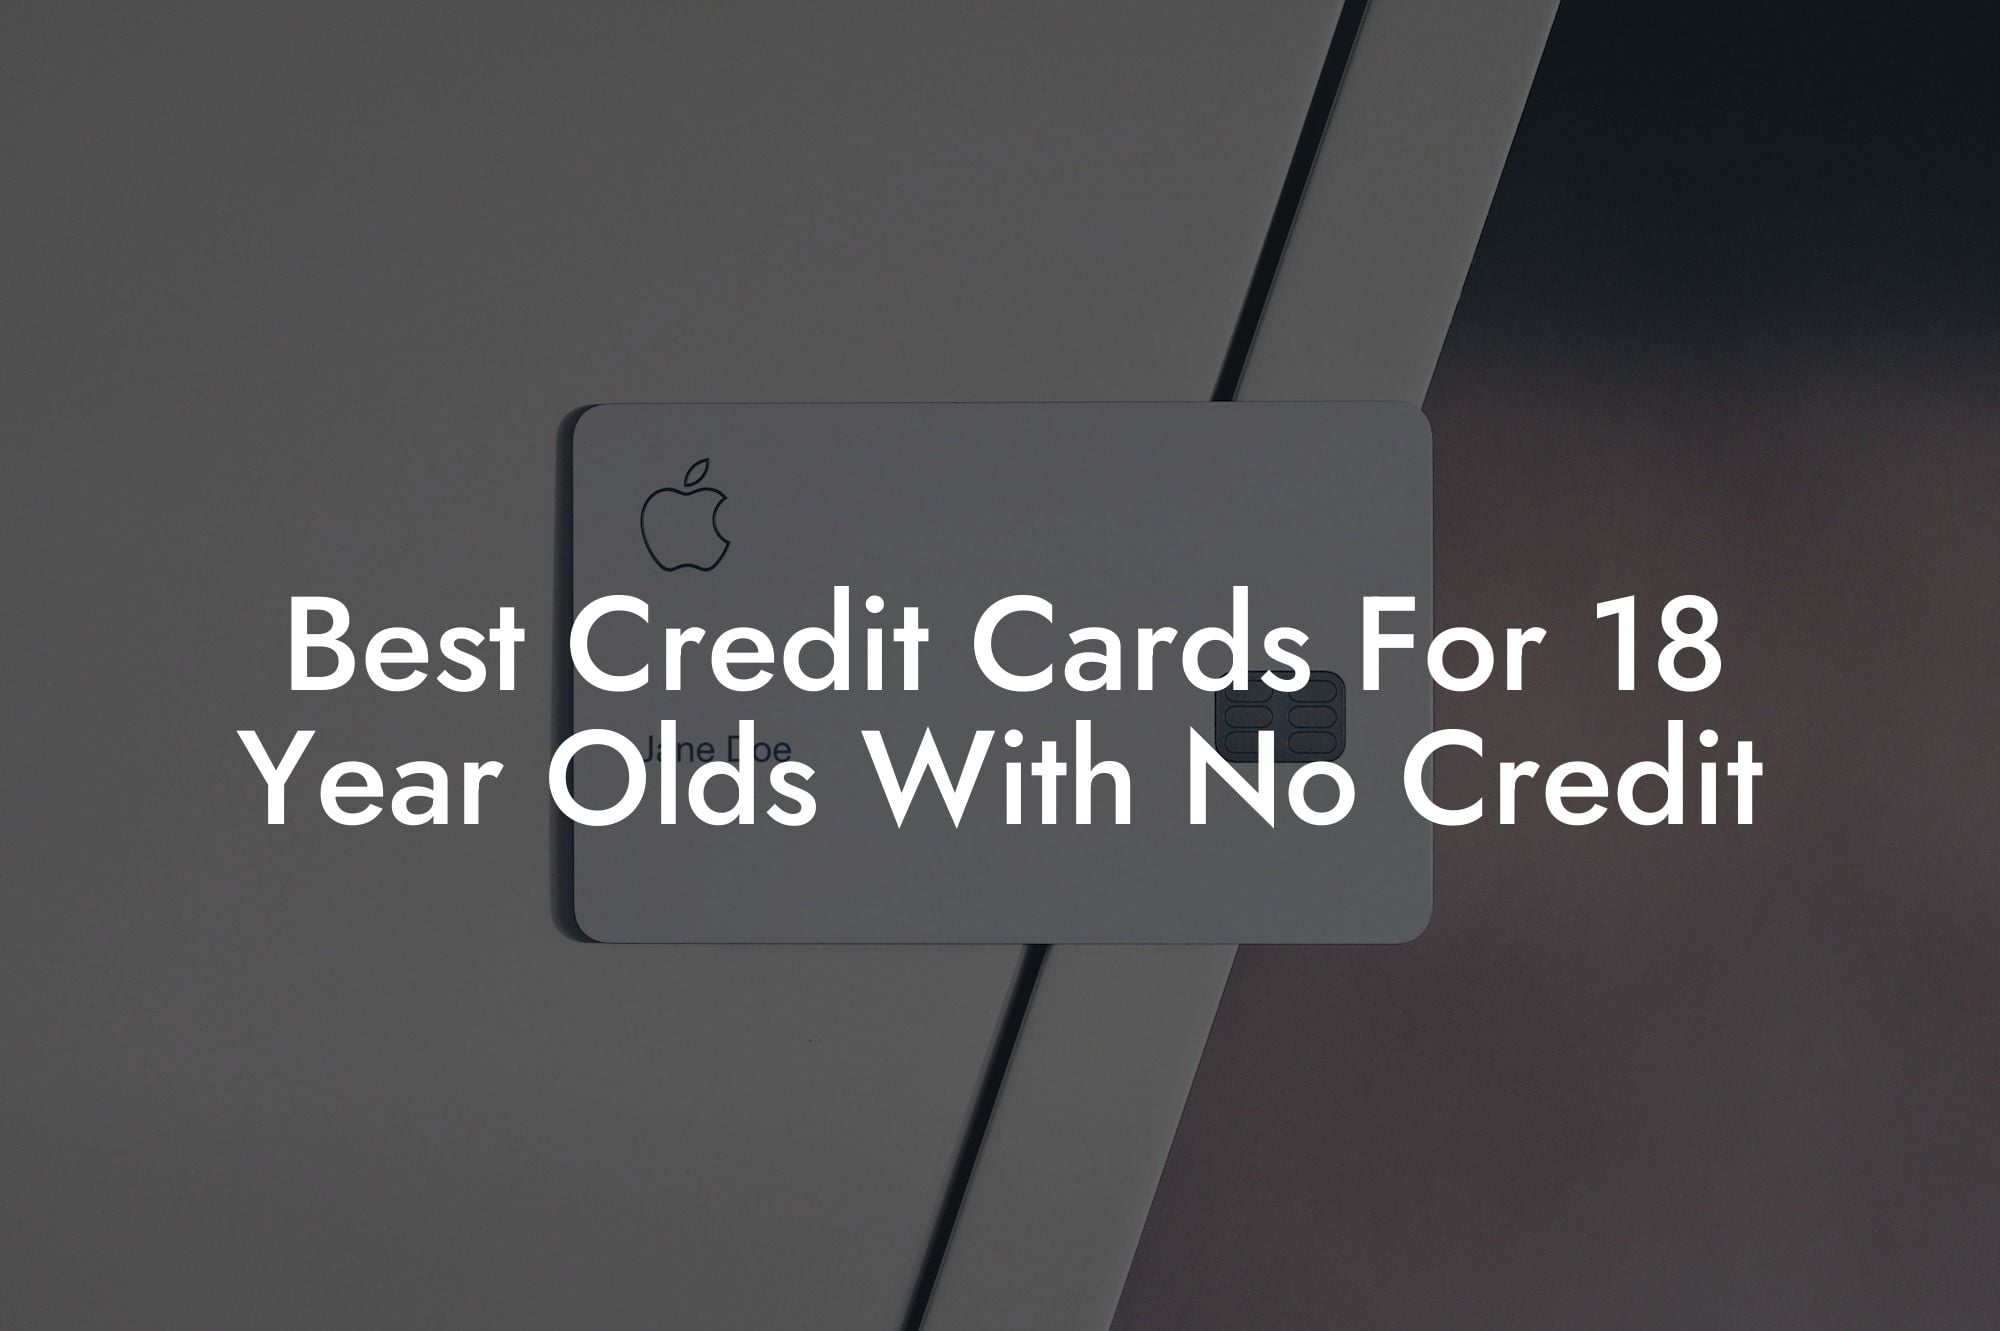 Best Credit Cards For 18 Year Olds With No Credit